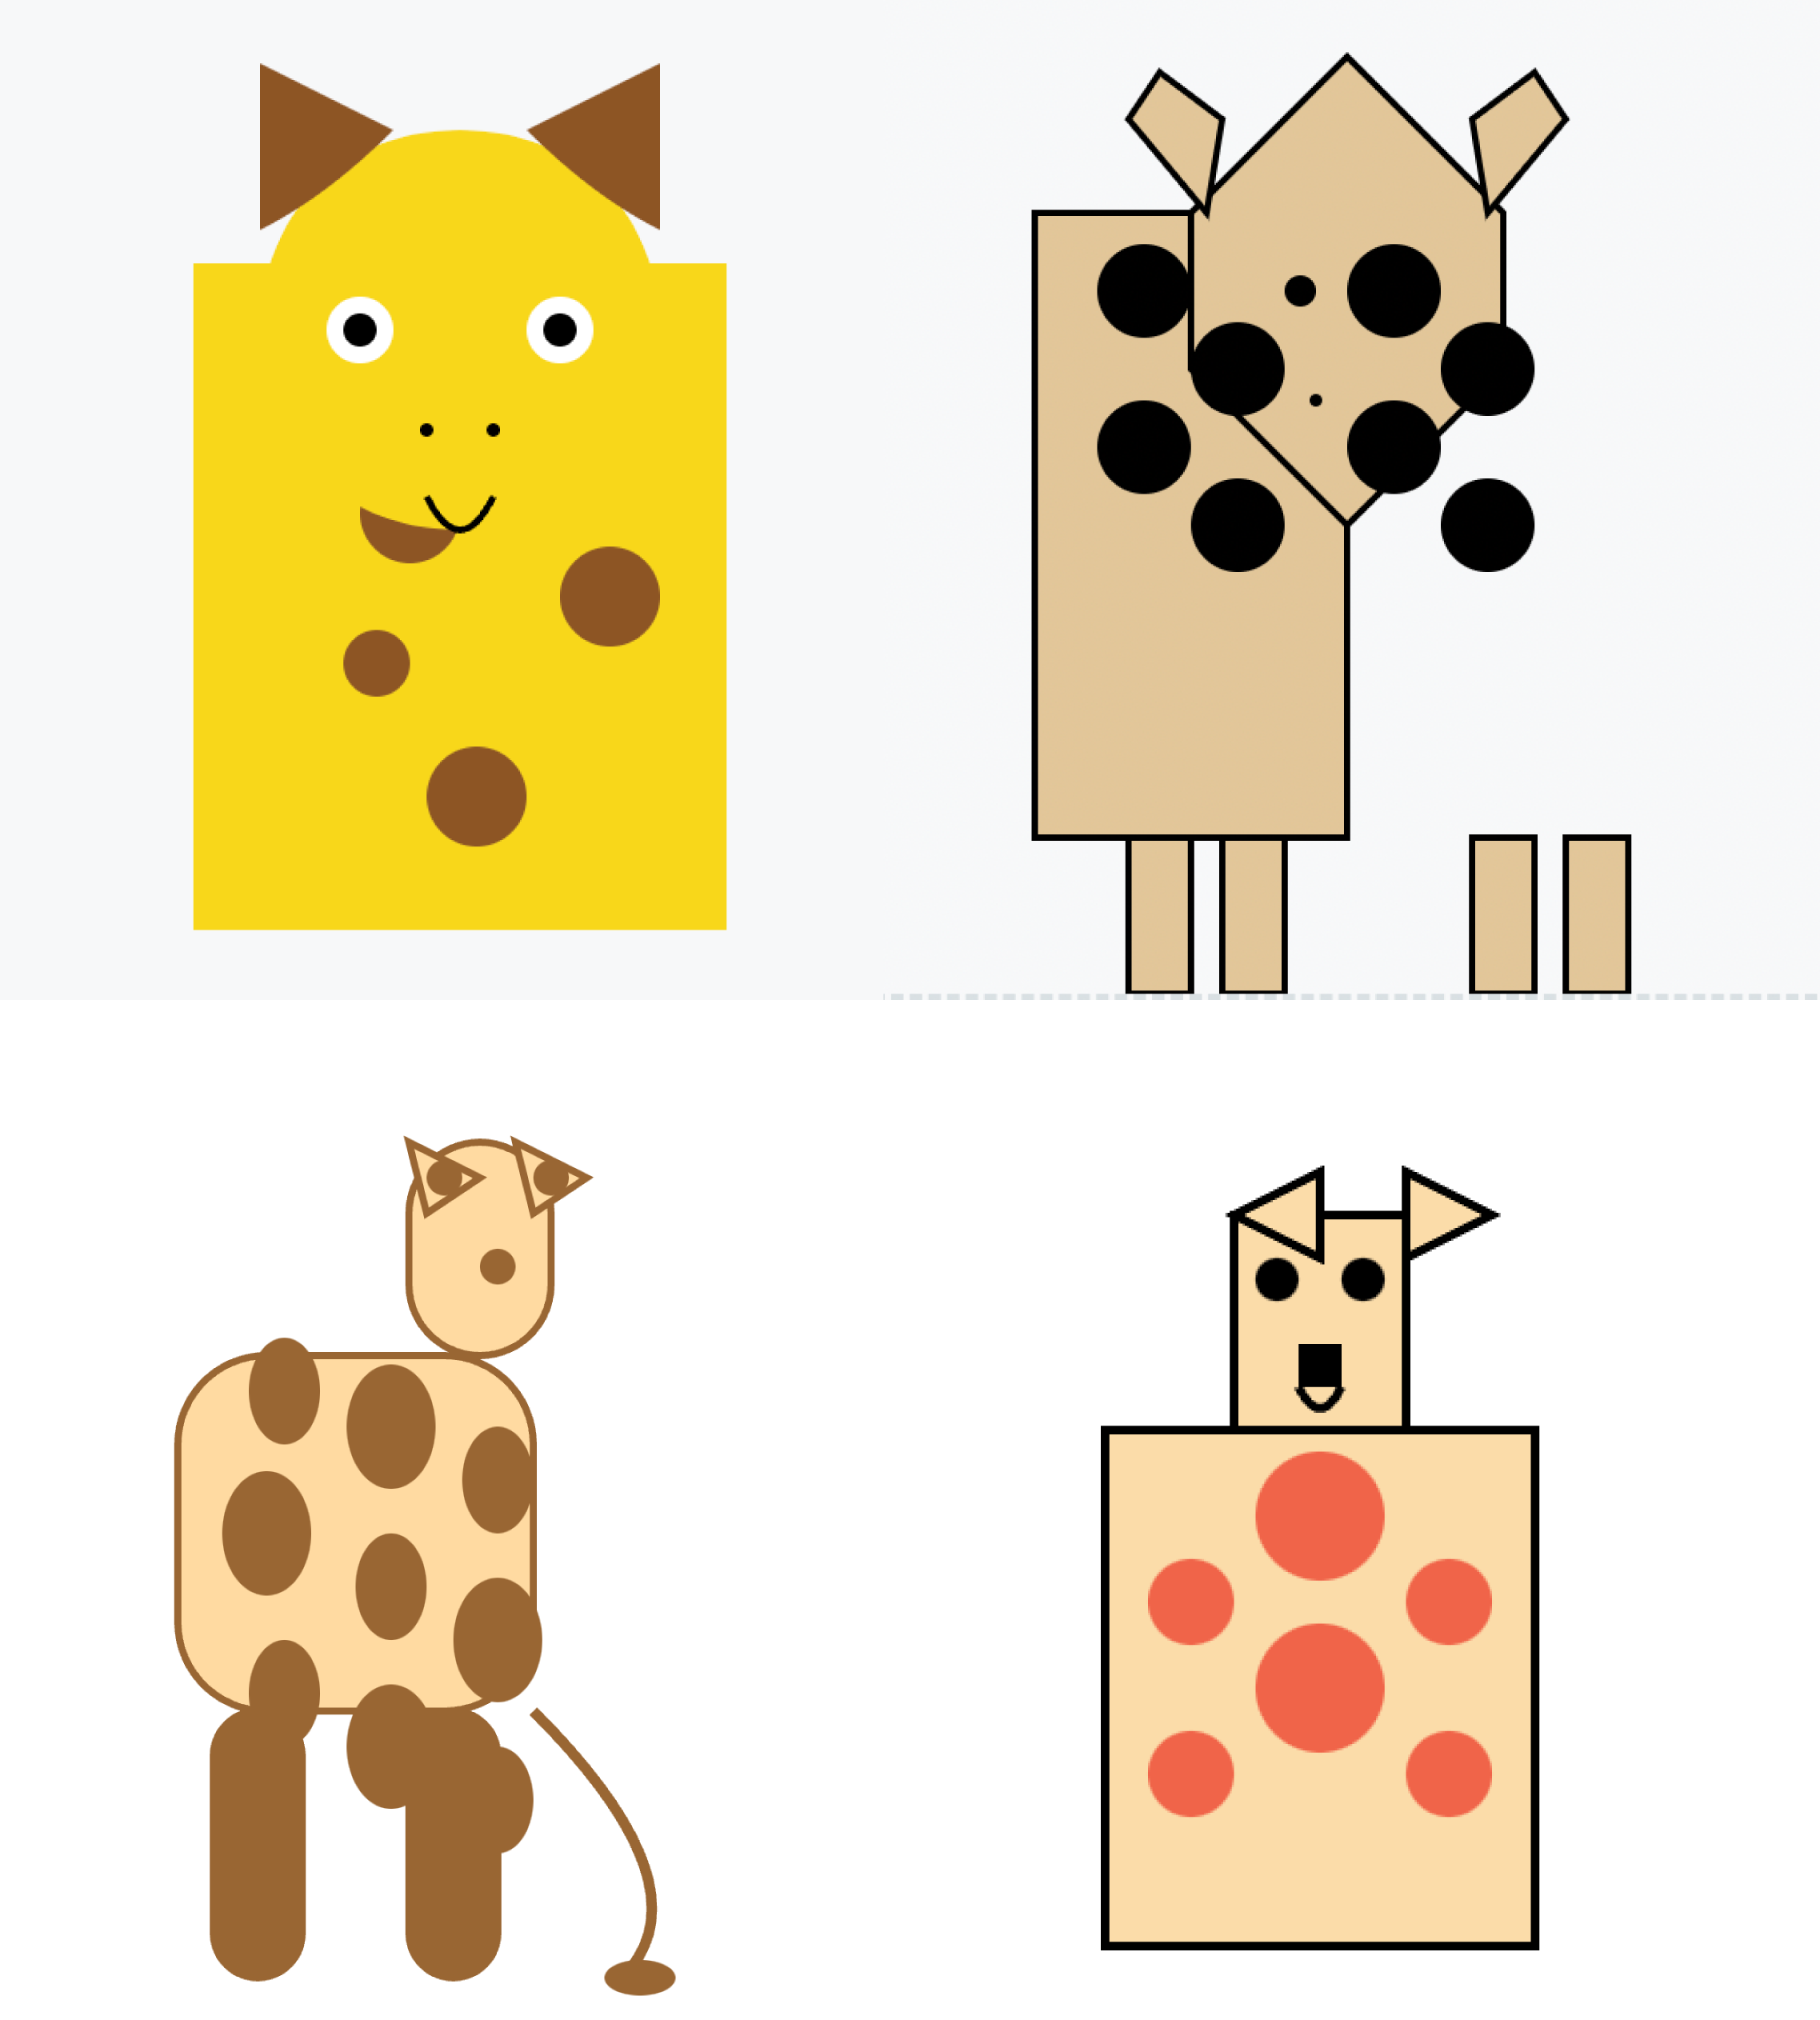 Four rectangles, each with heads of some sort on top. They all have spots, but the spots sometimes drift outside the body and the heads are so abstract they're recognizable only by their placement. One "giraffe" looks like it's pooping and peeing, but those are evidently its spots and tail.